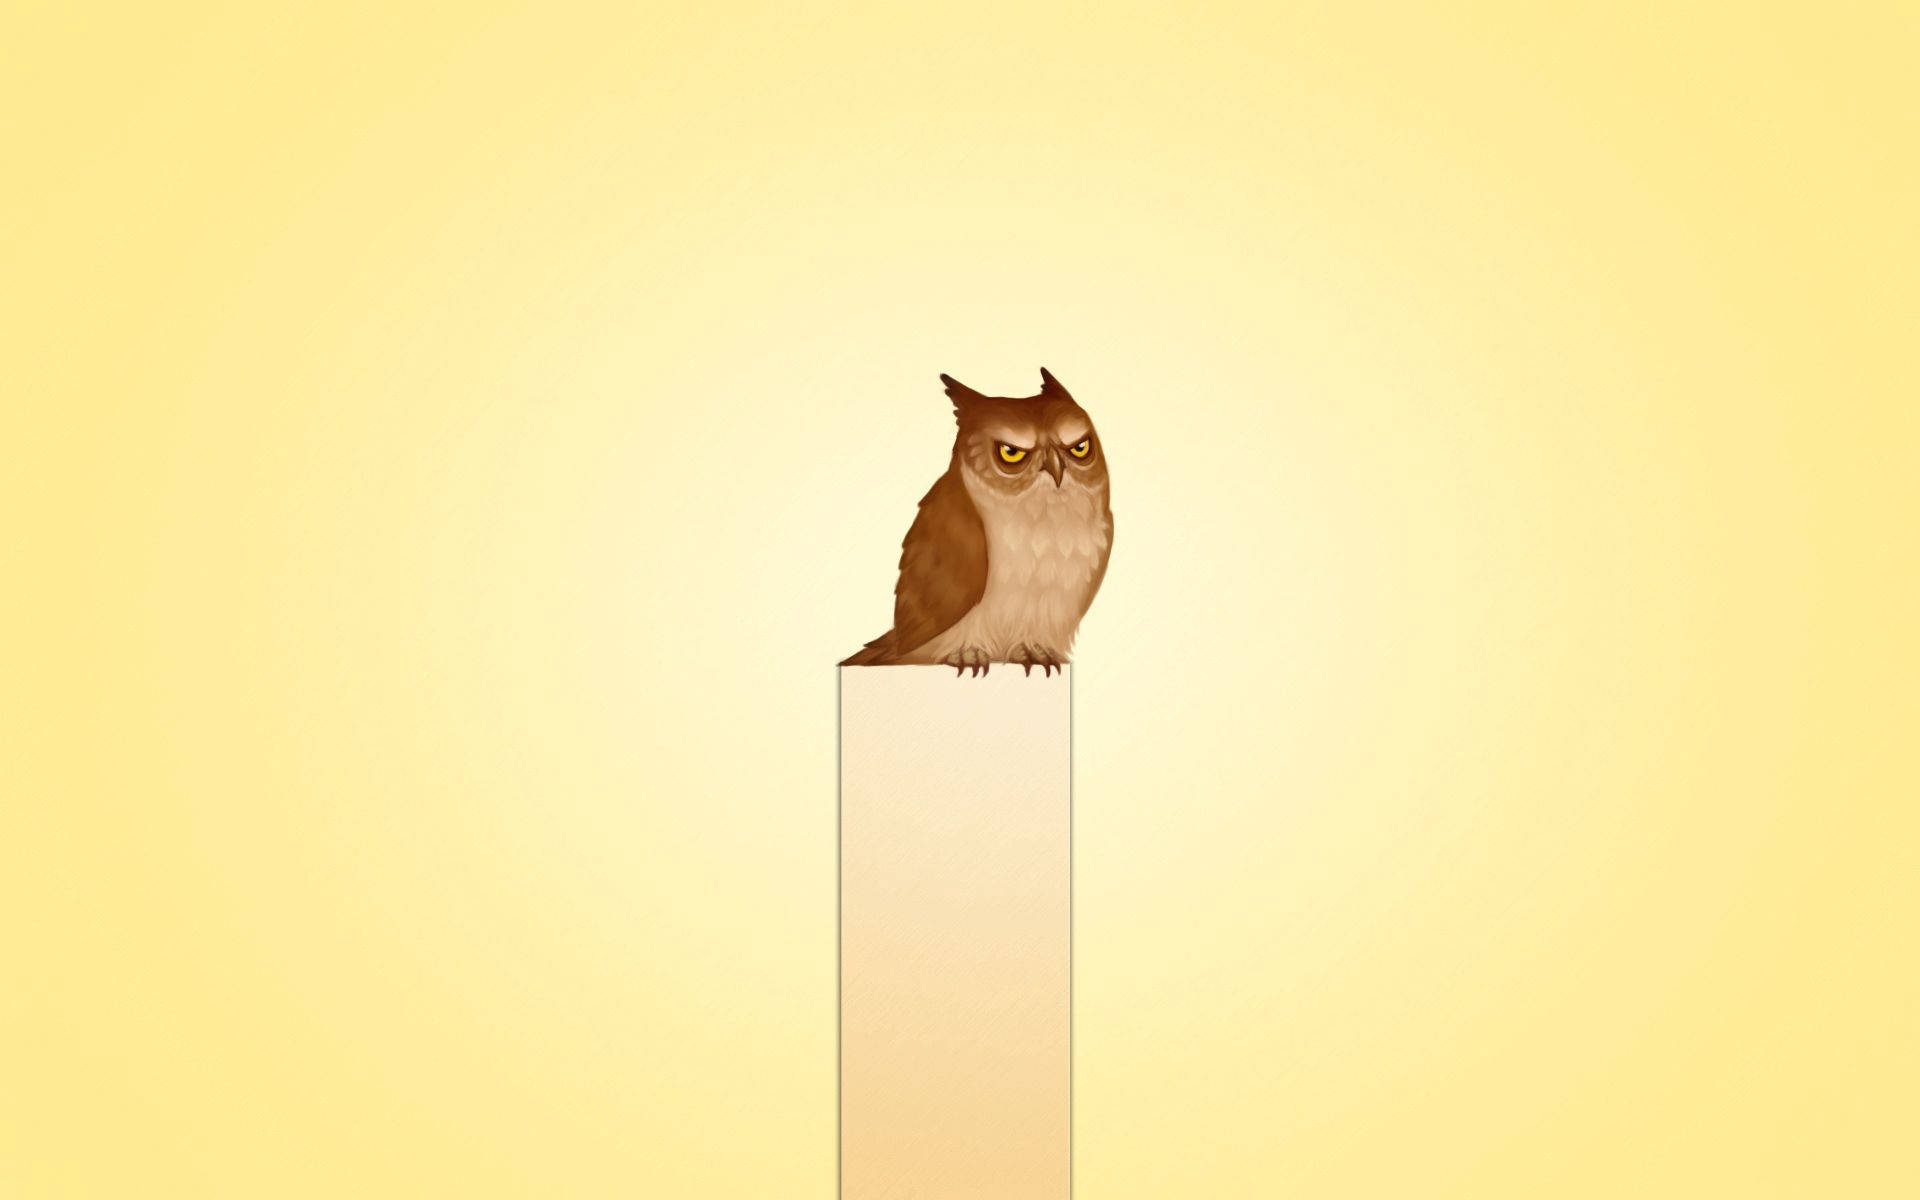 Staring off into the distance, this deceptively angry-looking yellow owl stands atop a branch. Wallpaper